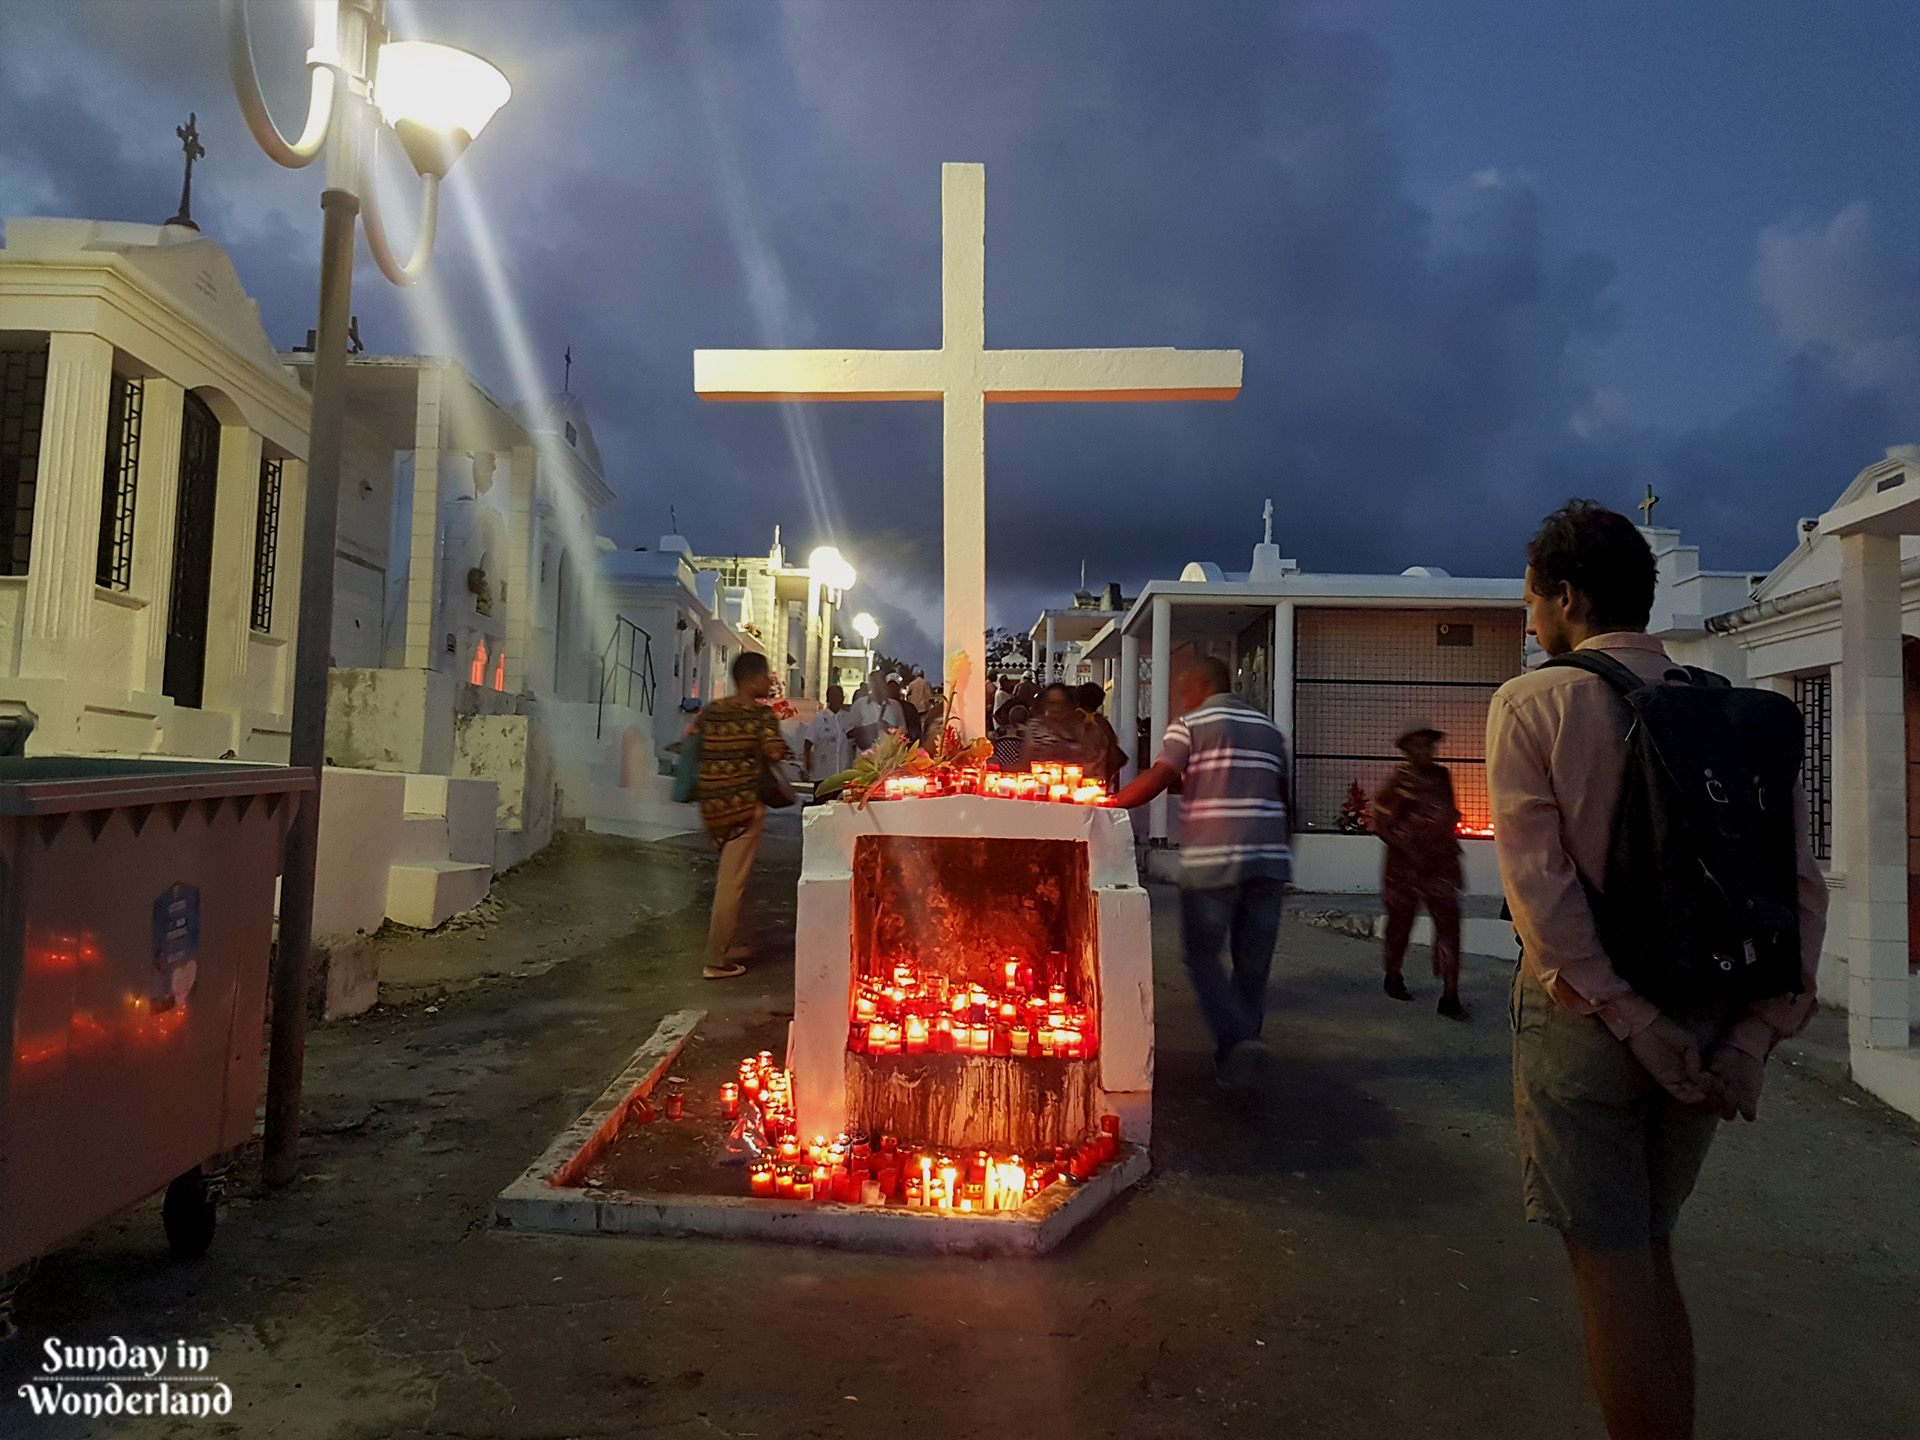 The cross on the main alley of cemetery in Sainte-Anne, Guadeloupe - Sunday on Wonderland Blog